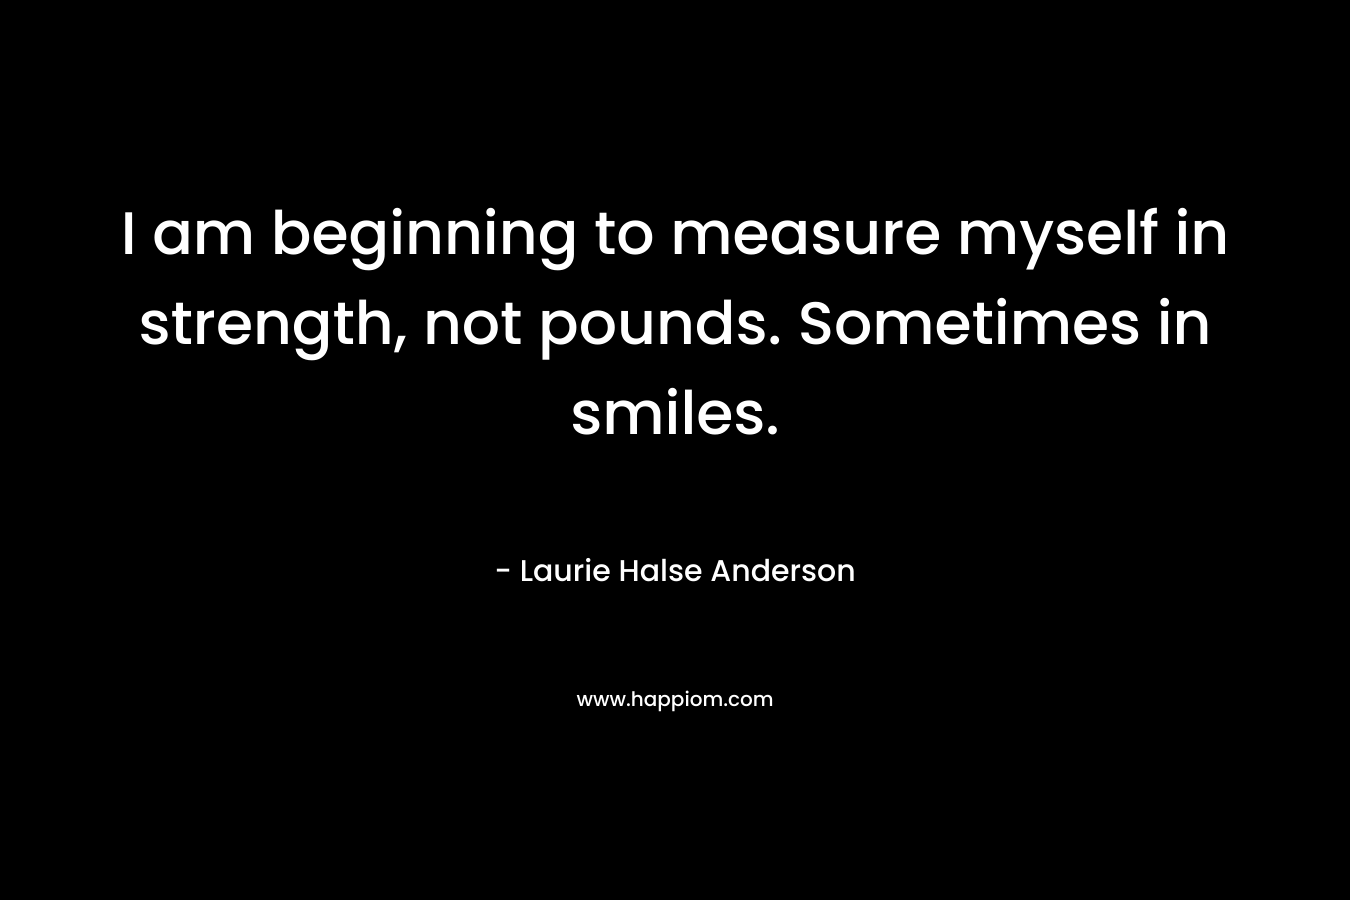 I am beginning to measure myself in strength, not pounds. Sometimes in smiles. – Laurie Halse Anderson